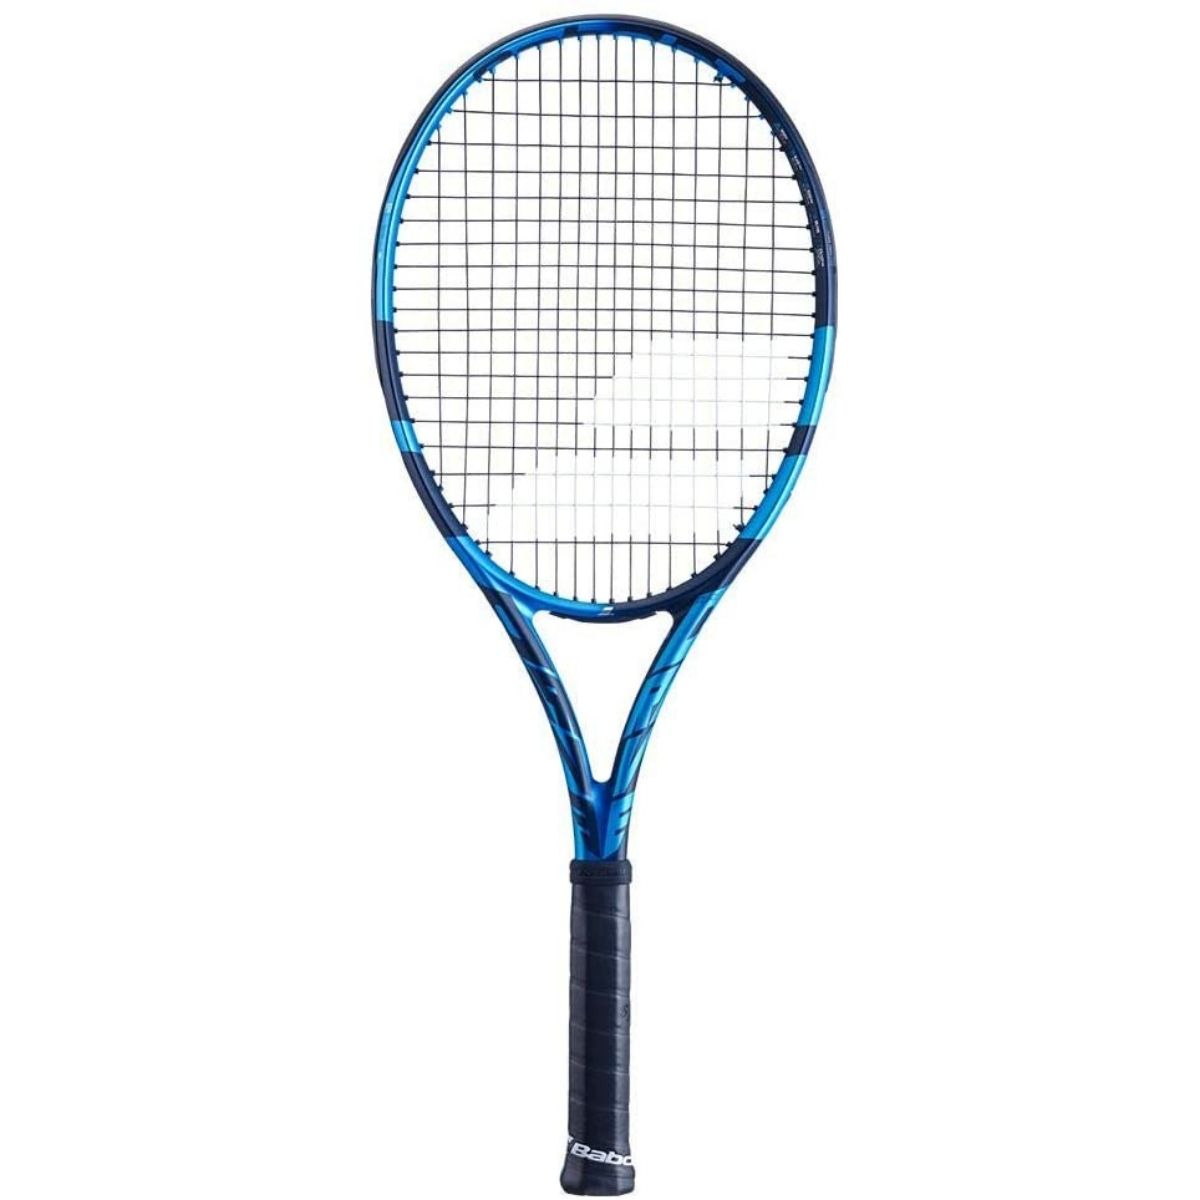 The Best Rackets for One Handed Backhand Options: Babolat Pure Drive